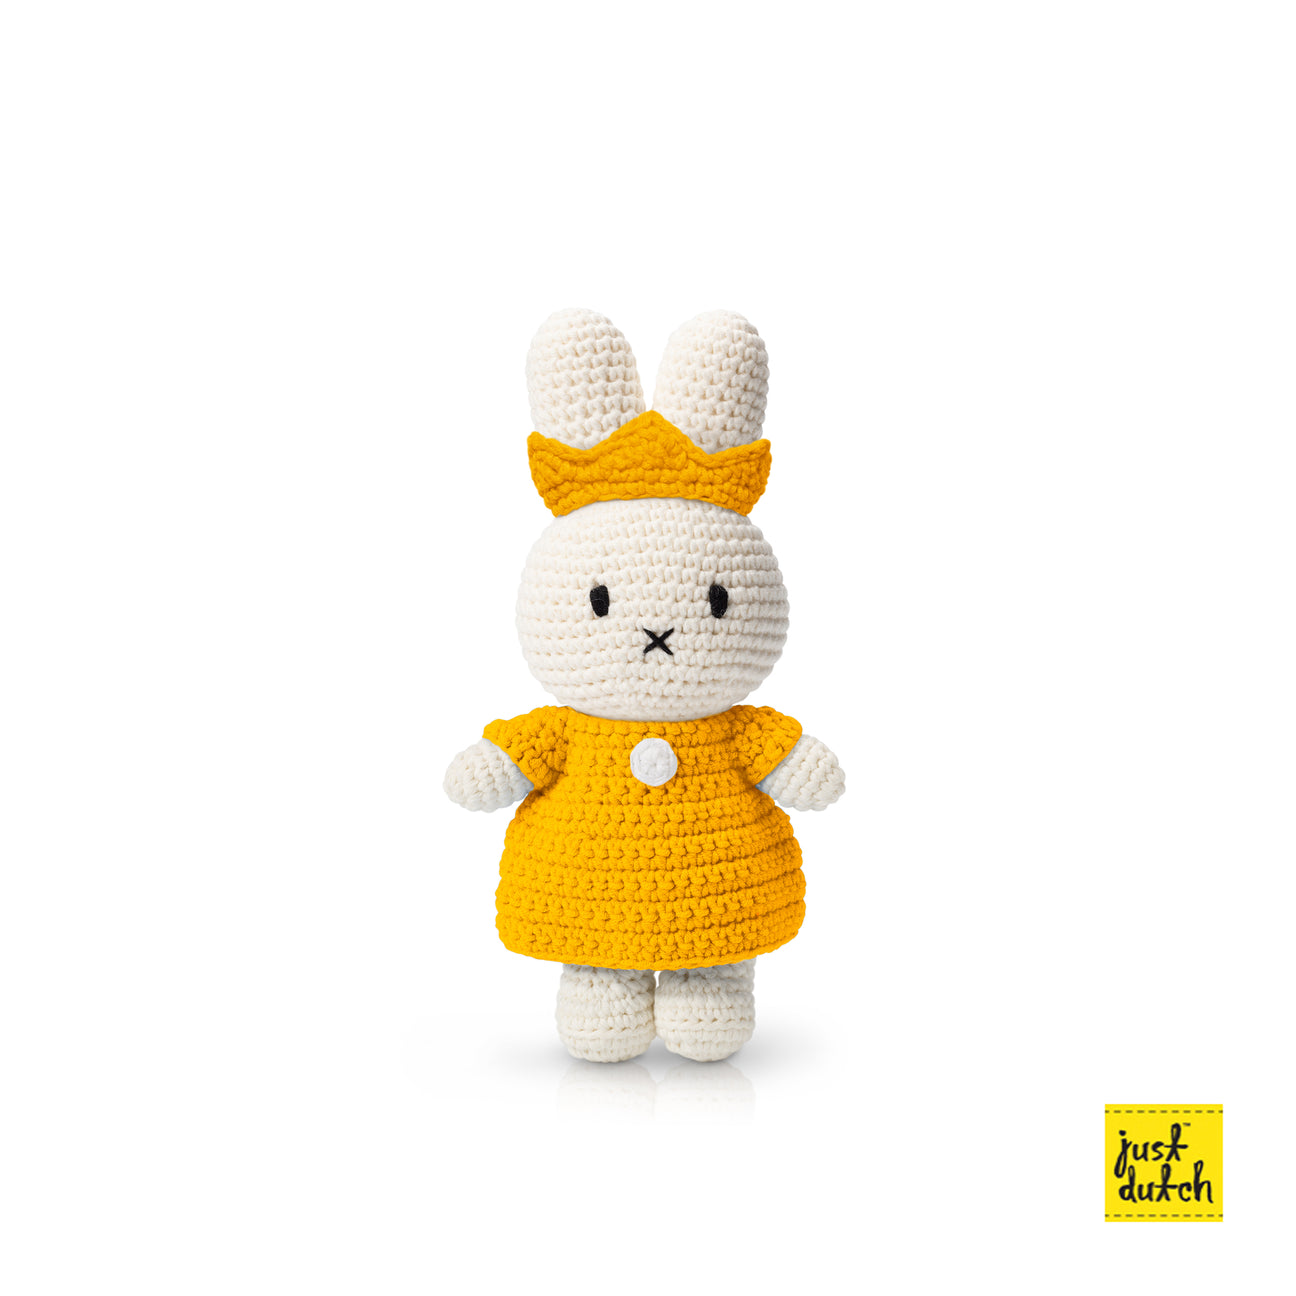 Miffy Knit Doll, Yellow Crown